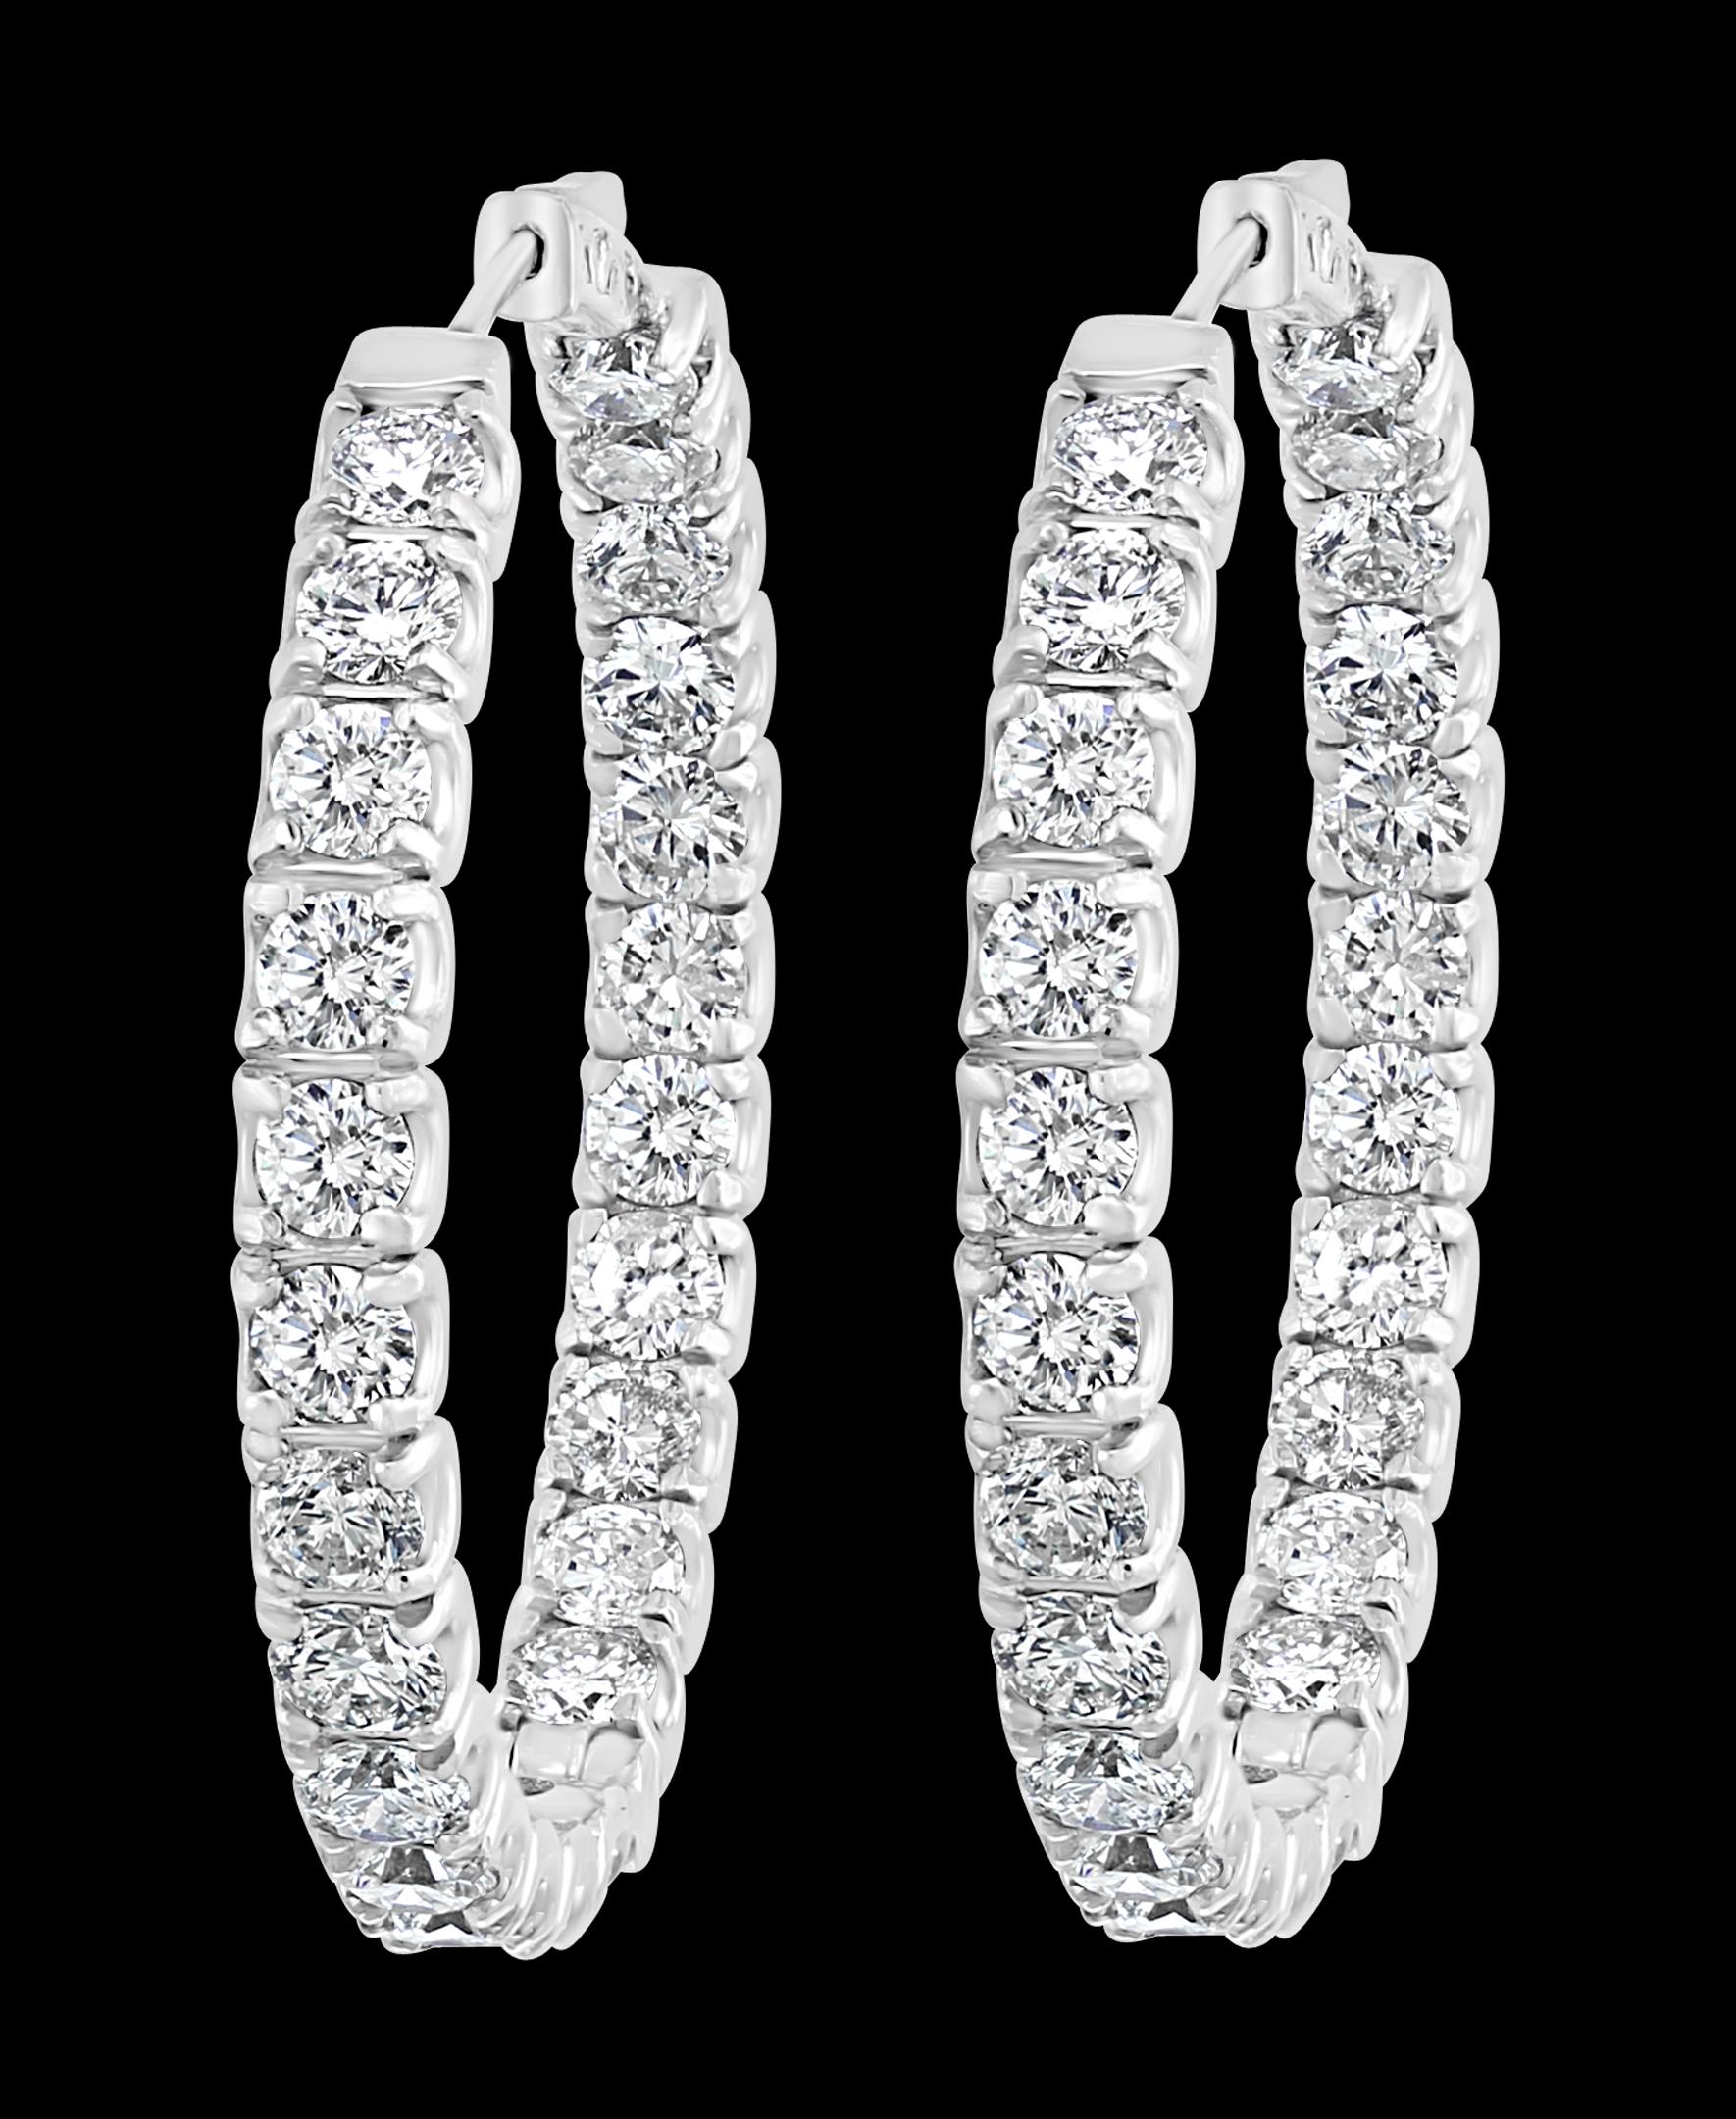 24 Carat, 50 Pointer Each Diamond  Inside Out Hoop Earrings 14 Karat White Gold
A fabulous pair of earrings with an enormous amount of look and sparkle!
Large Brilliant Round shape diamonds make a large Inside out Hoop
Clasp: push Lever clasp
14